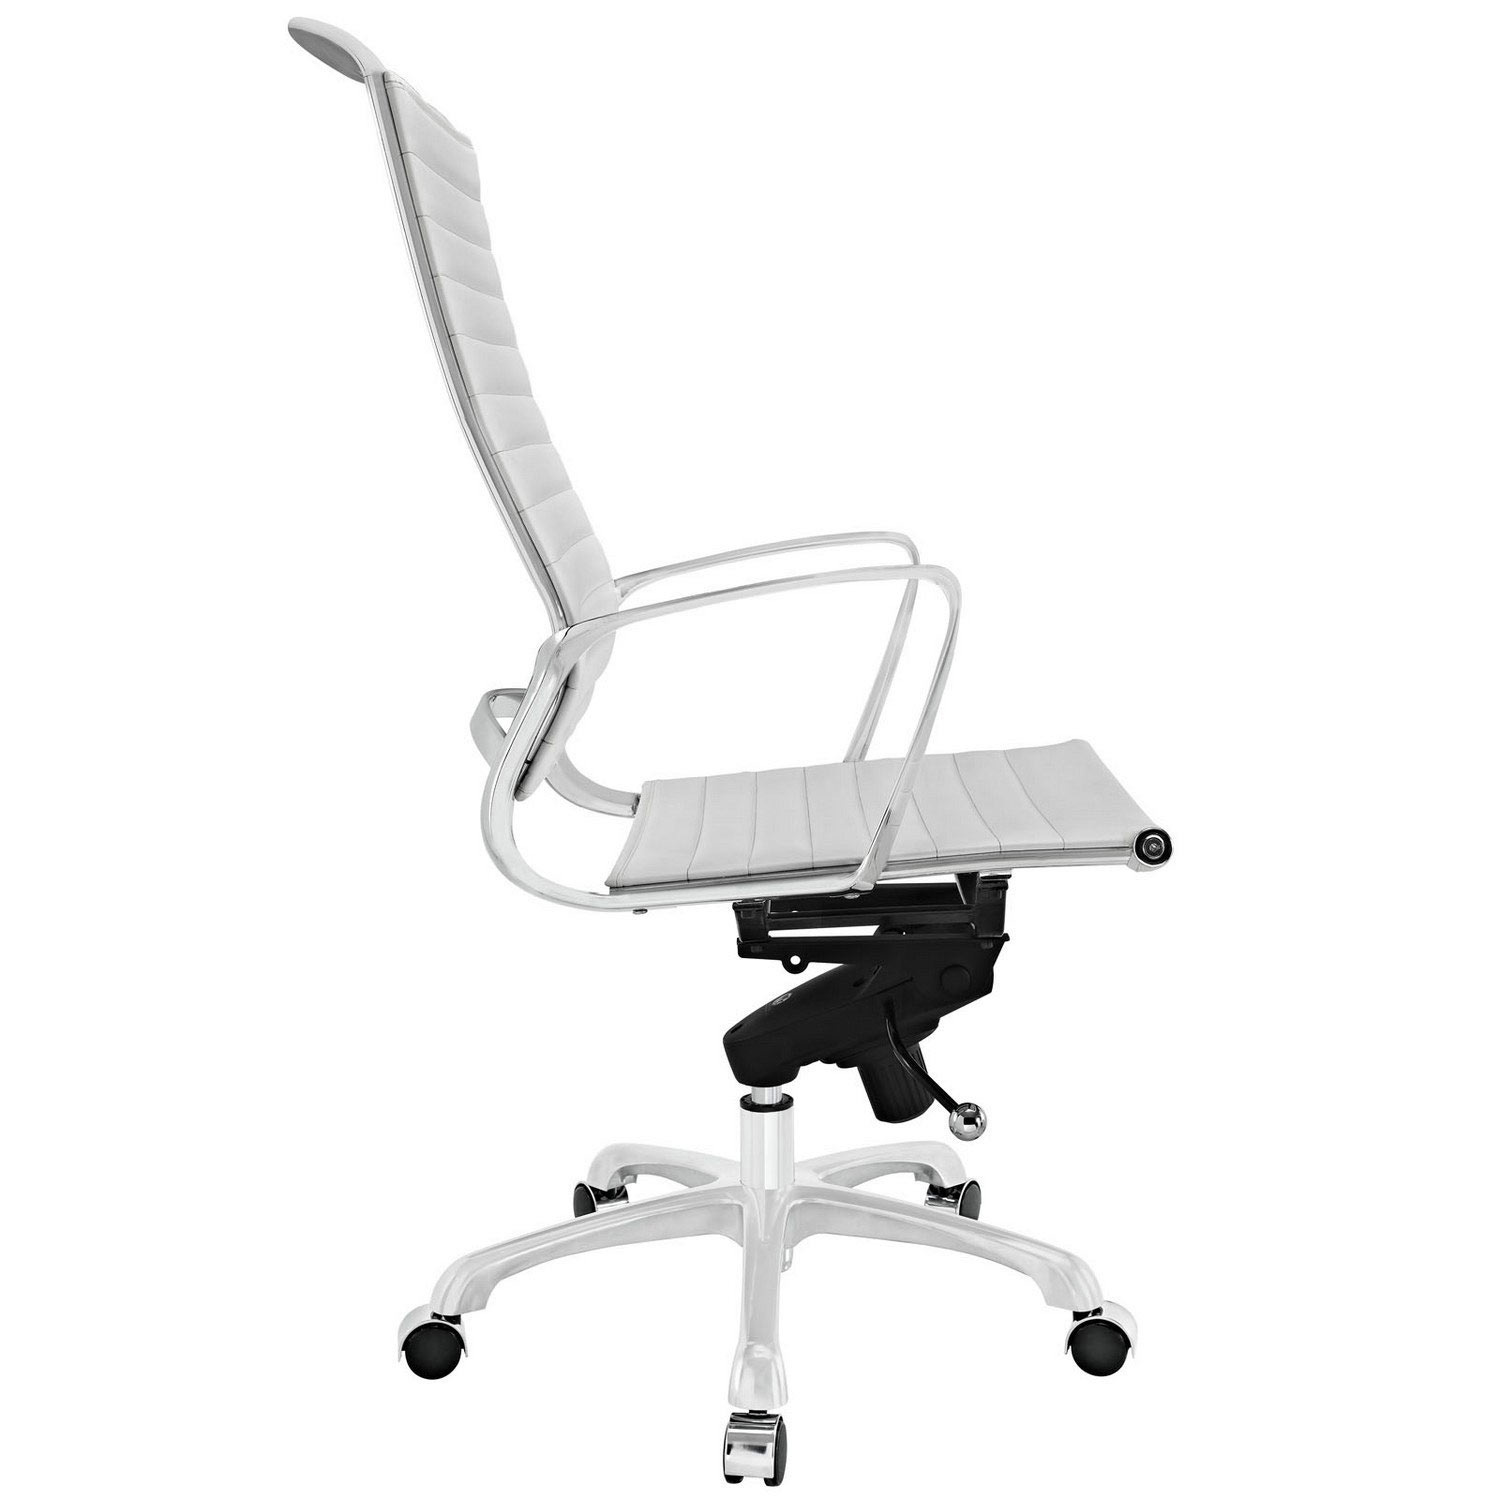 Modway Tempo Highback Office Chair - White